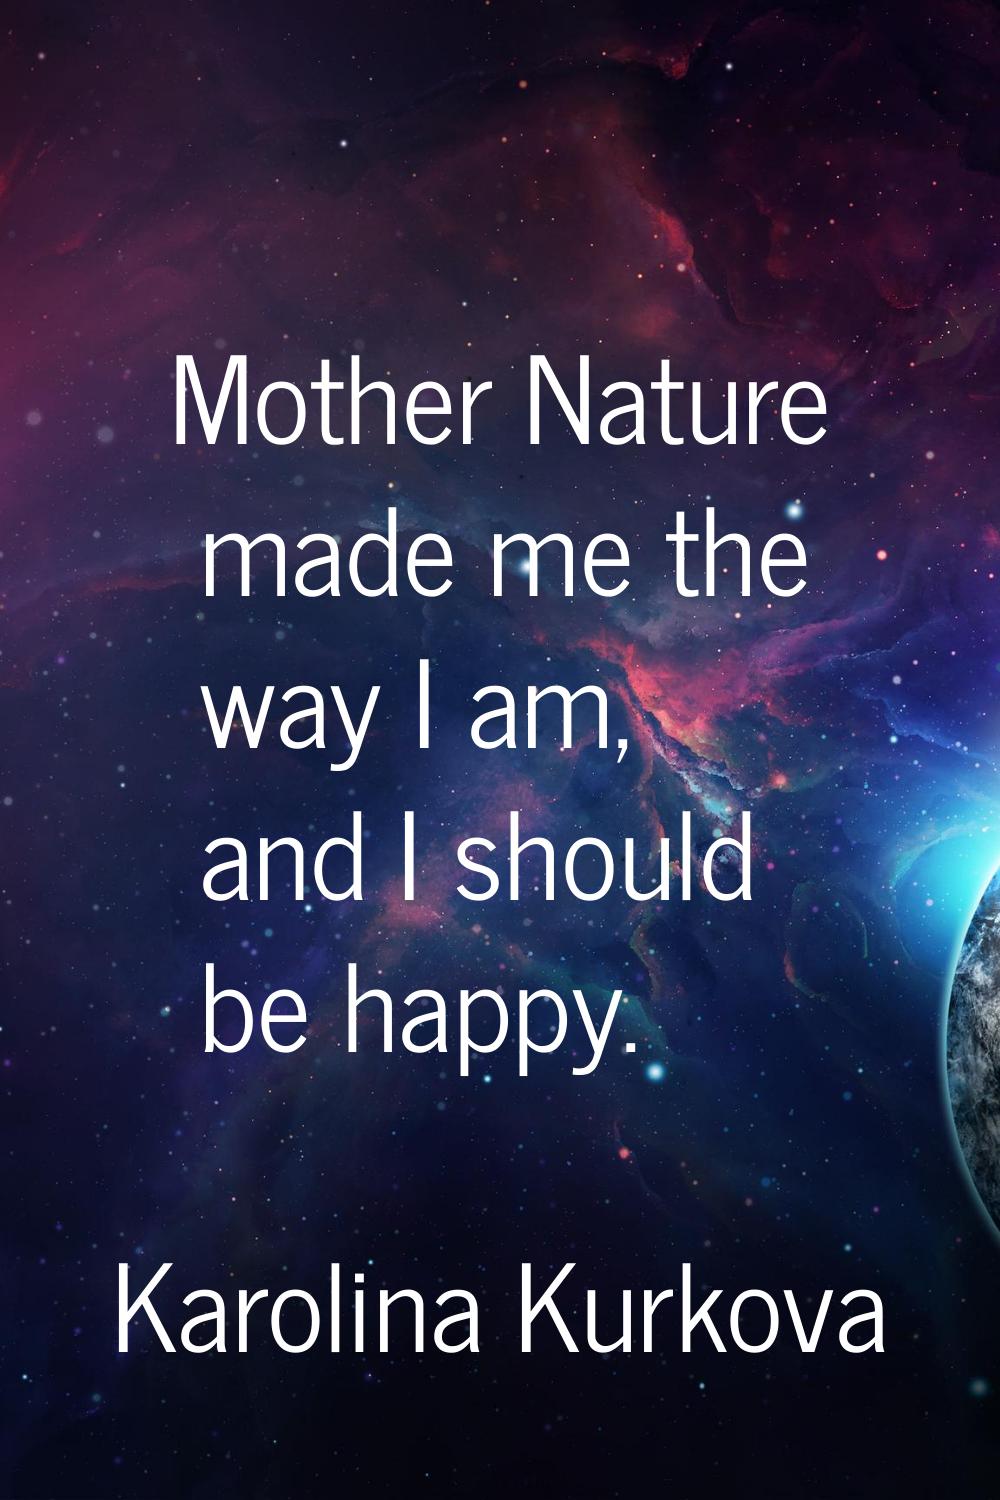 Mother Nature made me the way I am, and I should be happy.